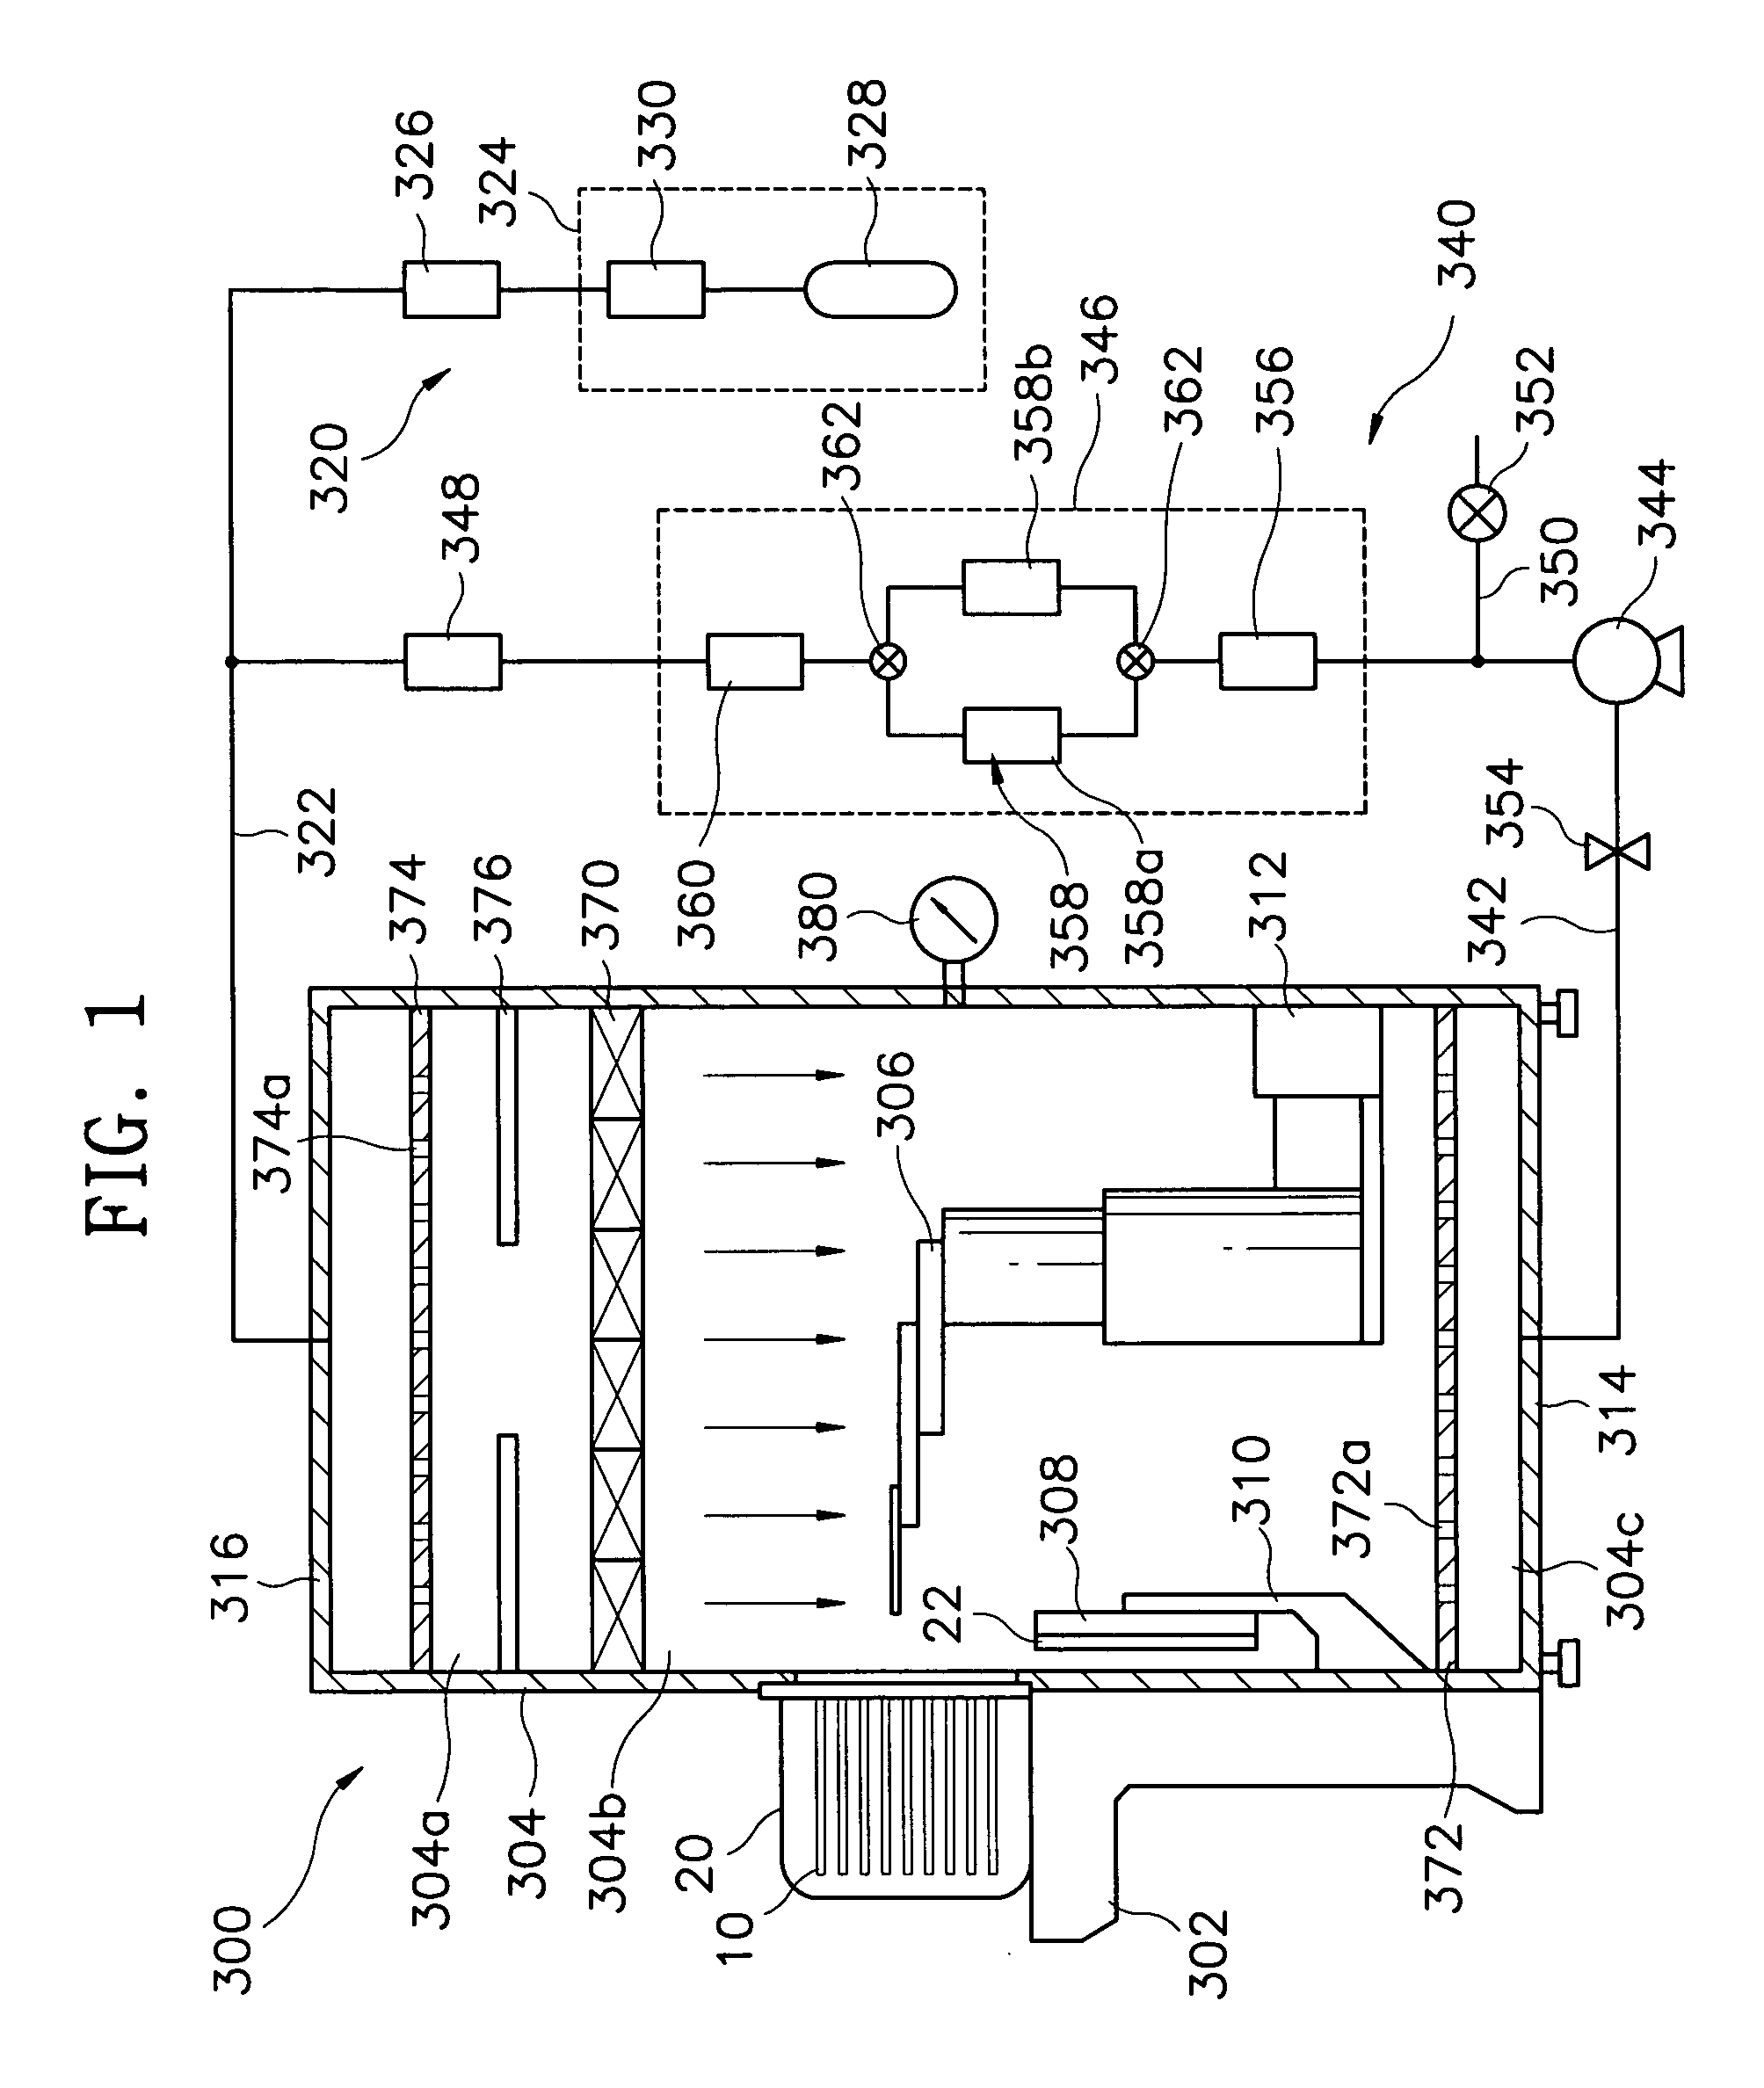 Module for transferring a substrate